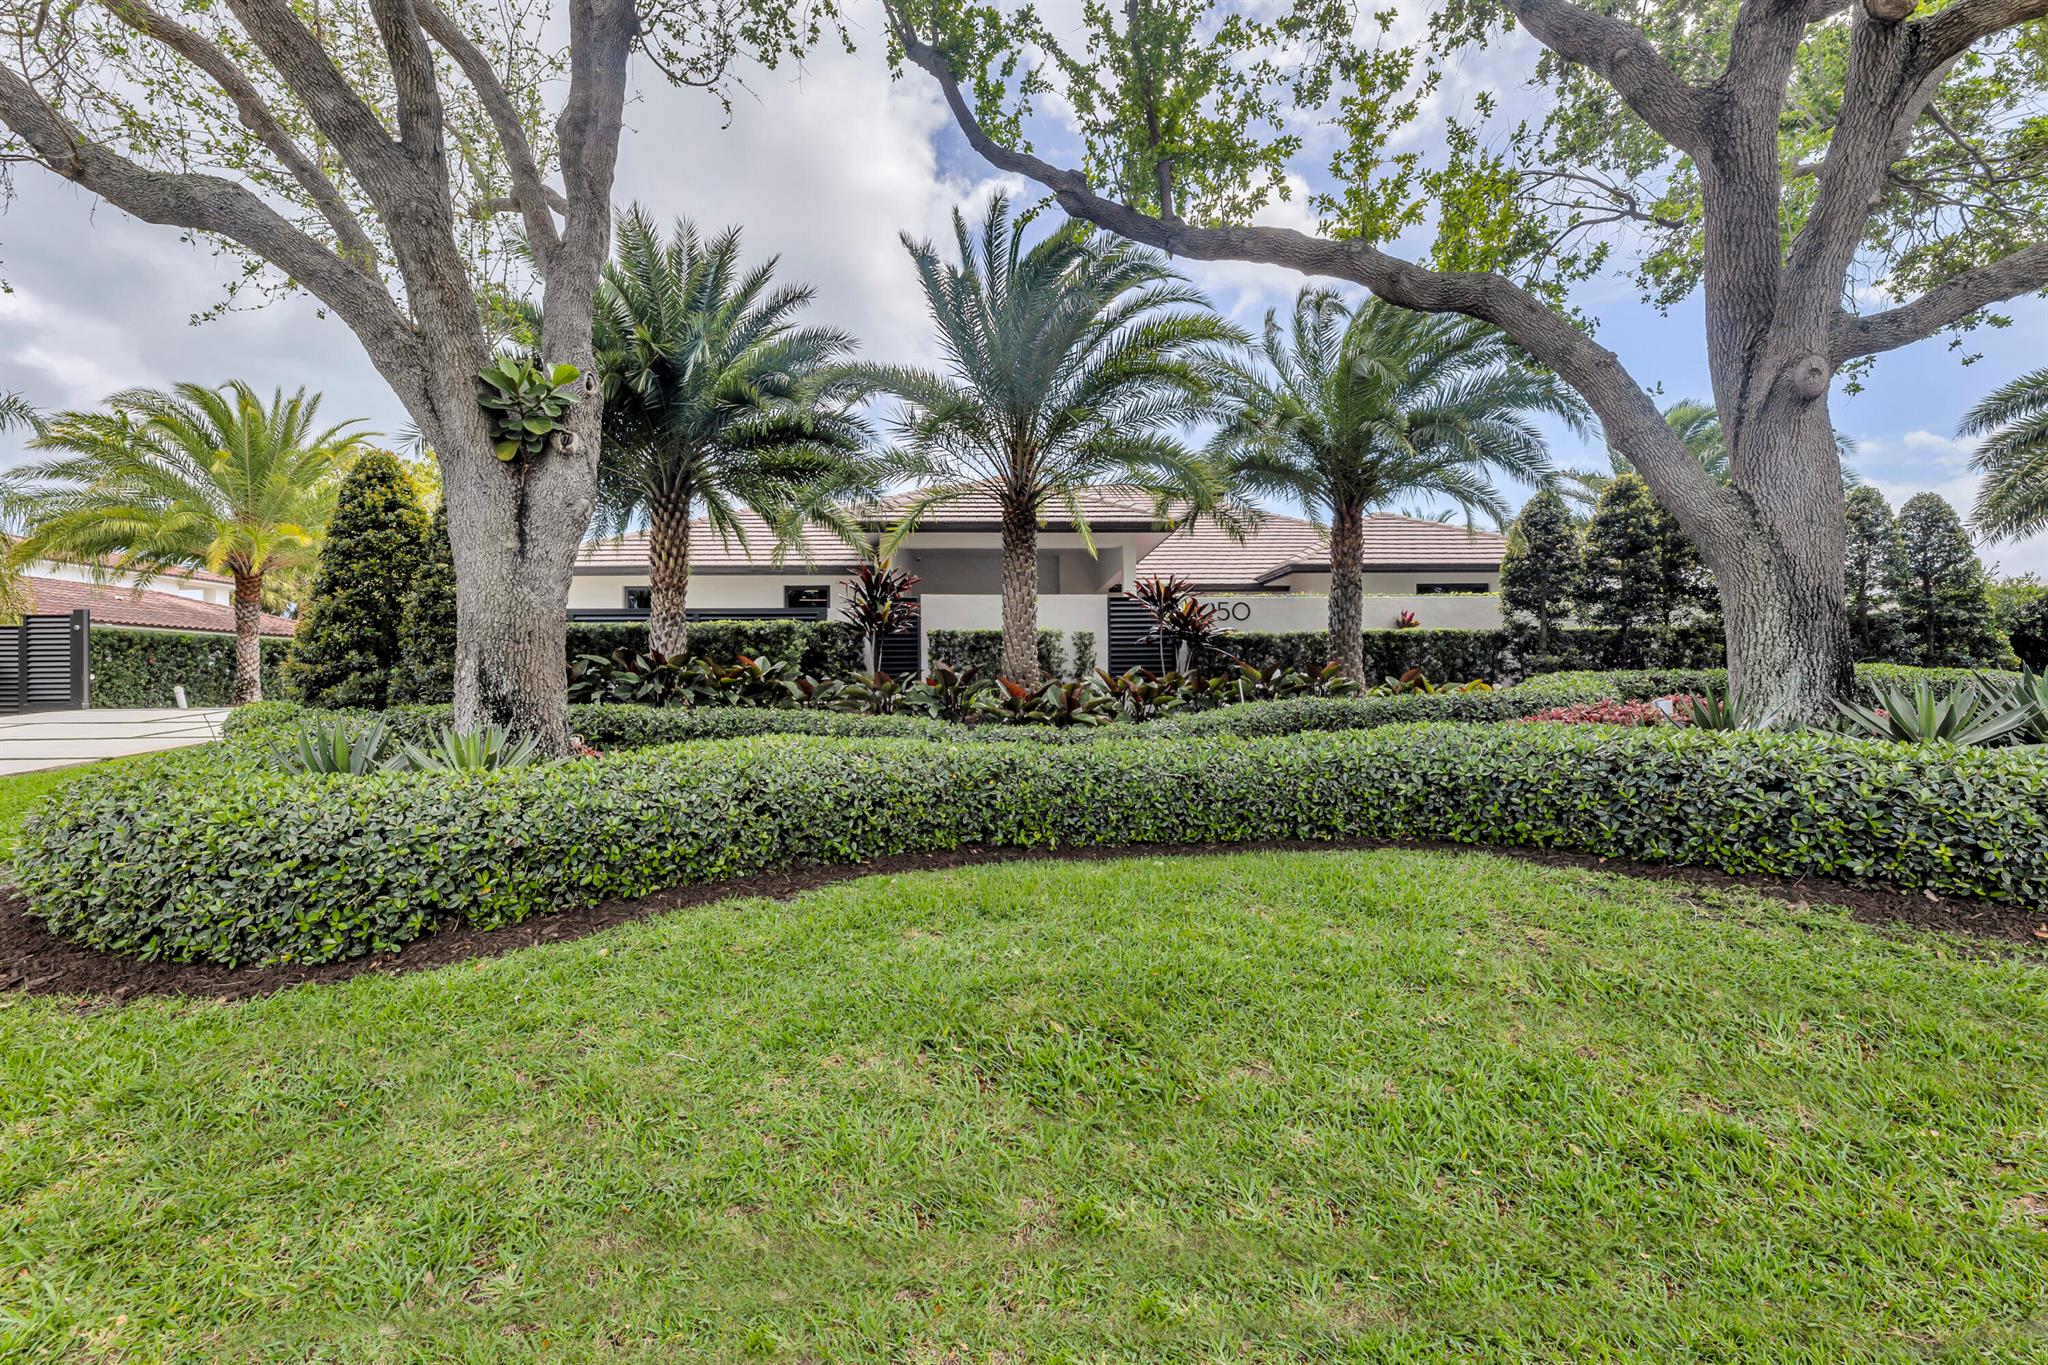 Introducing this exquisite family home on enormous 1/2 acre directly on the prestigious Coral Ridge Country Club Golf Course. This modern and elegant residence offers a perfect blend of luxury and convenience, providing an ideal setting for entertaining and a top-of-the-line security system for peace of mind. This stunning home features 5 bedrooms, 4 bathrooms, and a spacious 3800 square feet of living space, situated on a total lot size of 20589 square feet. The property is centrally located to Cardinal Gibbons, Pine Crest, and West Minister Academy, ensuring accessibility to renowned educational institutions. Upon entering, you are greeted by a wealth of amenities newly updated and beautifully appointed. The property boasts a full house generator, a new AC system, (more)